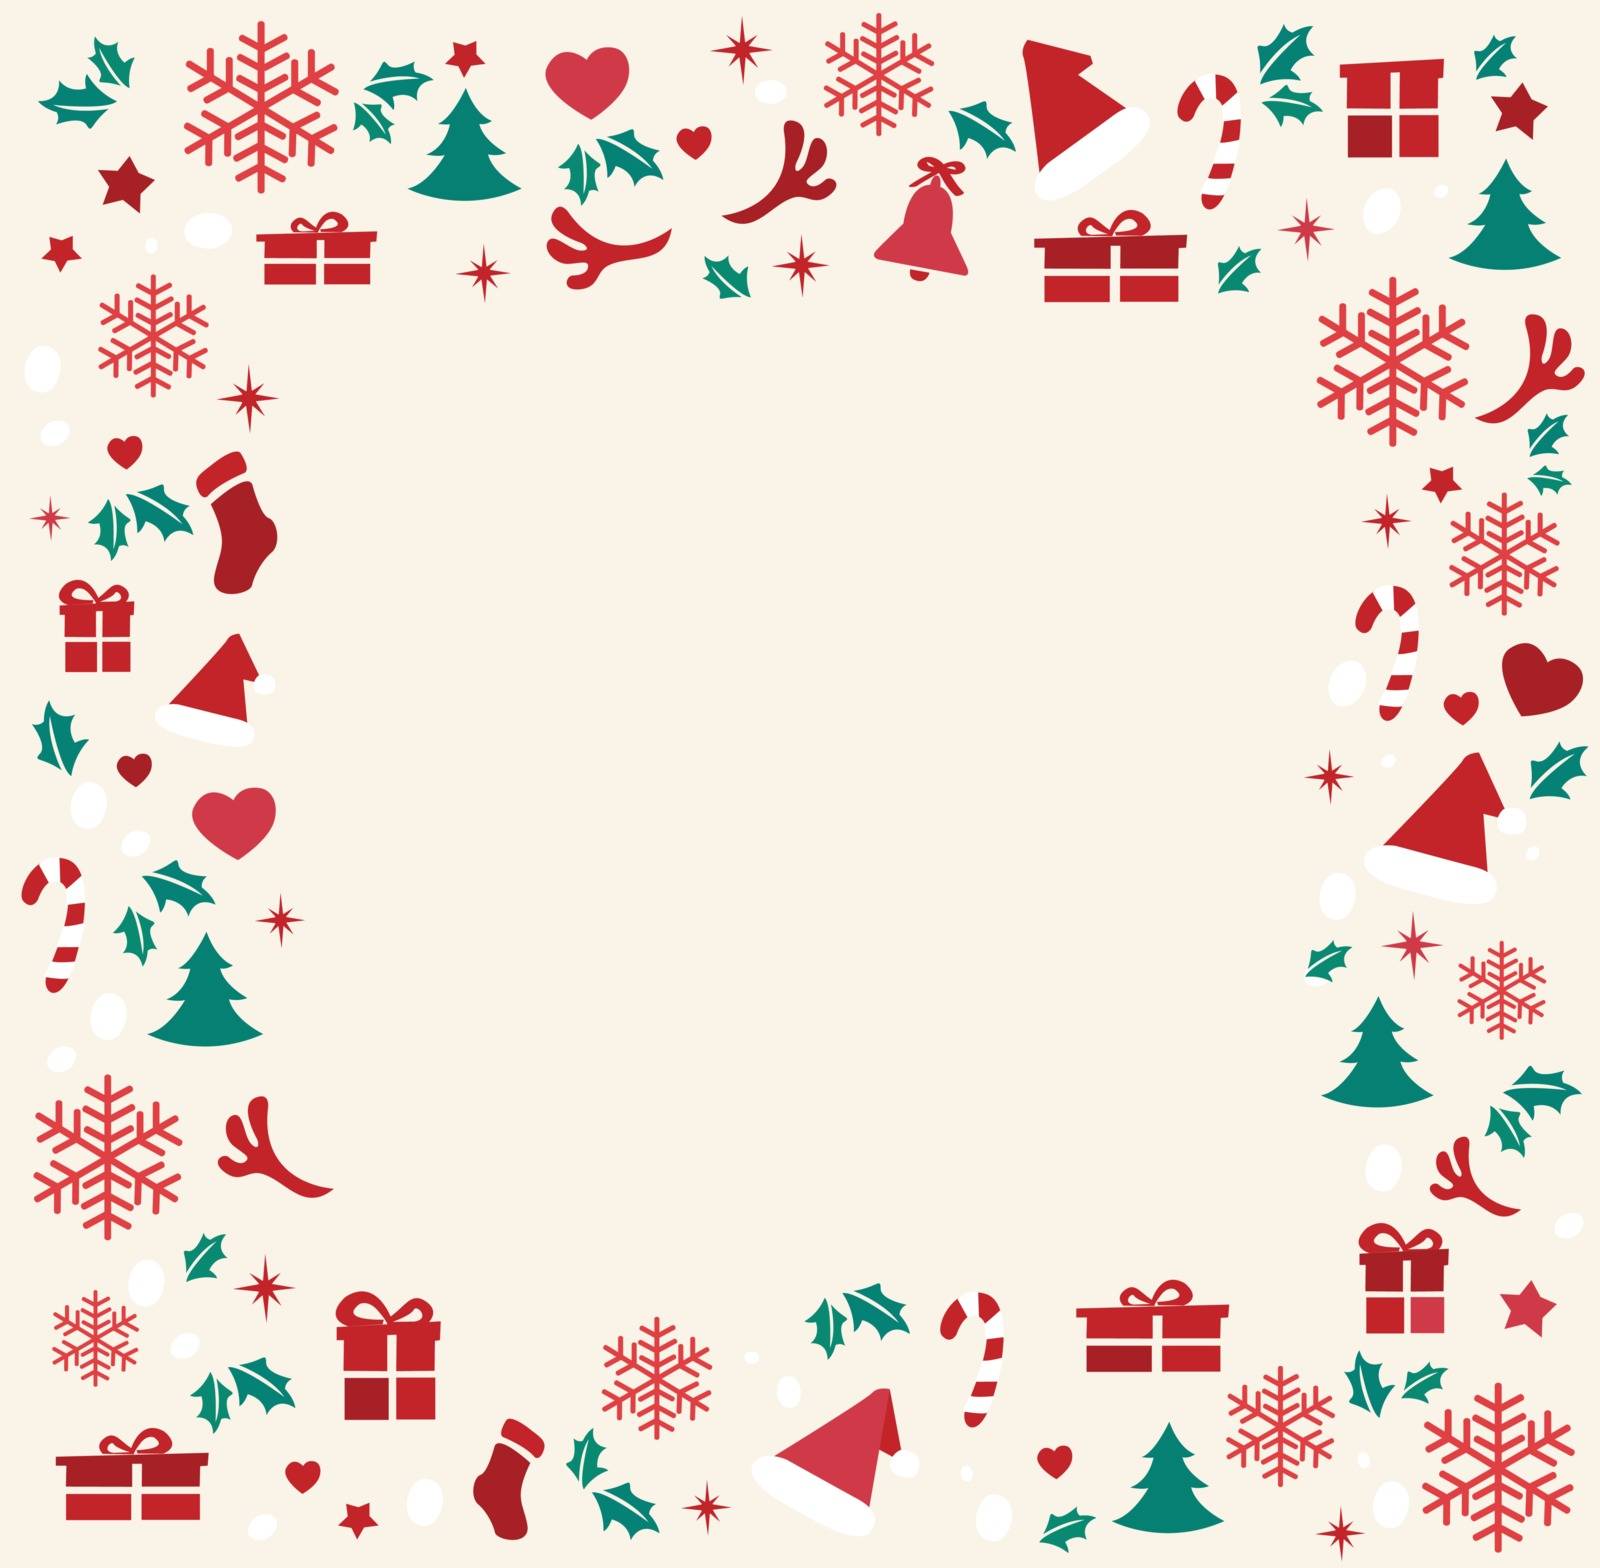 Christmas elements with space  pattern background vector illustration by h-santima